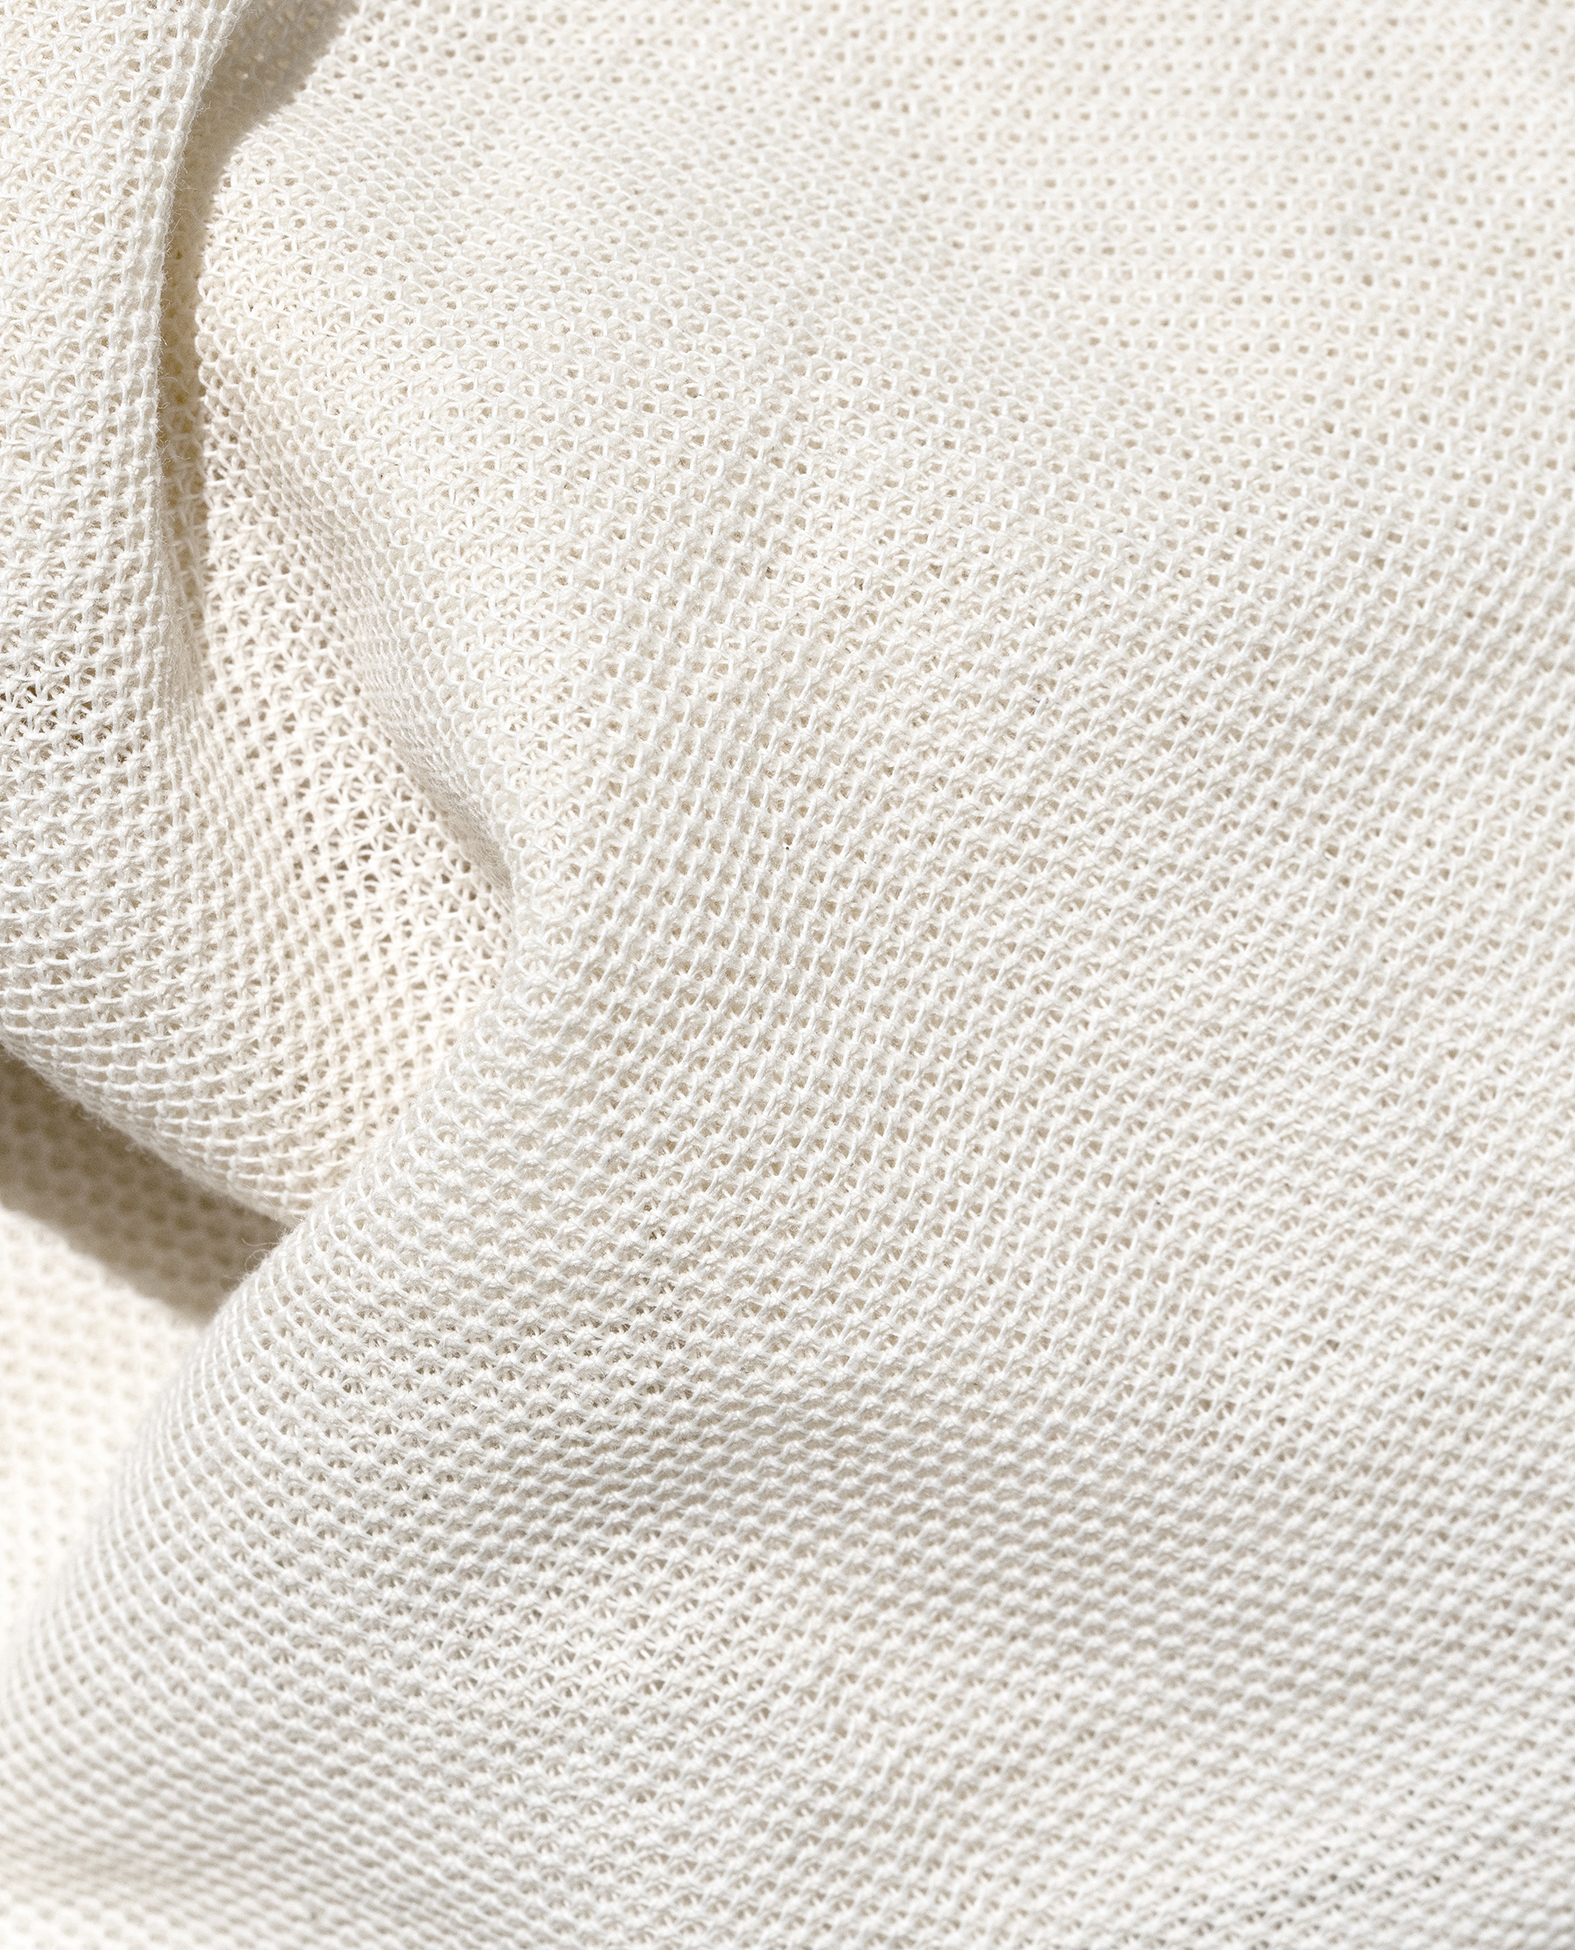 Recycled Polyester Fabric With Wicking Treatment, Functional Fabrics &  Knitted Fabrics Manufacturer